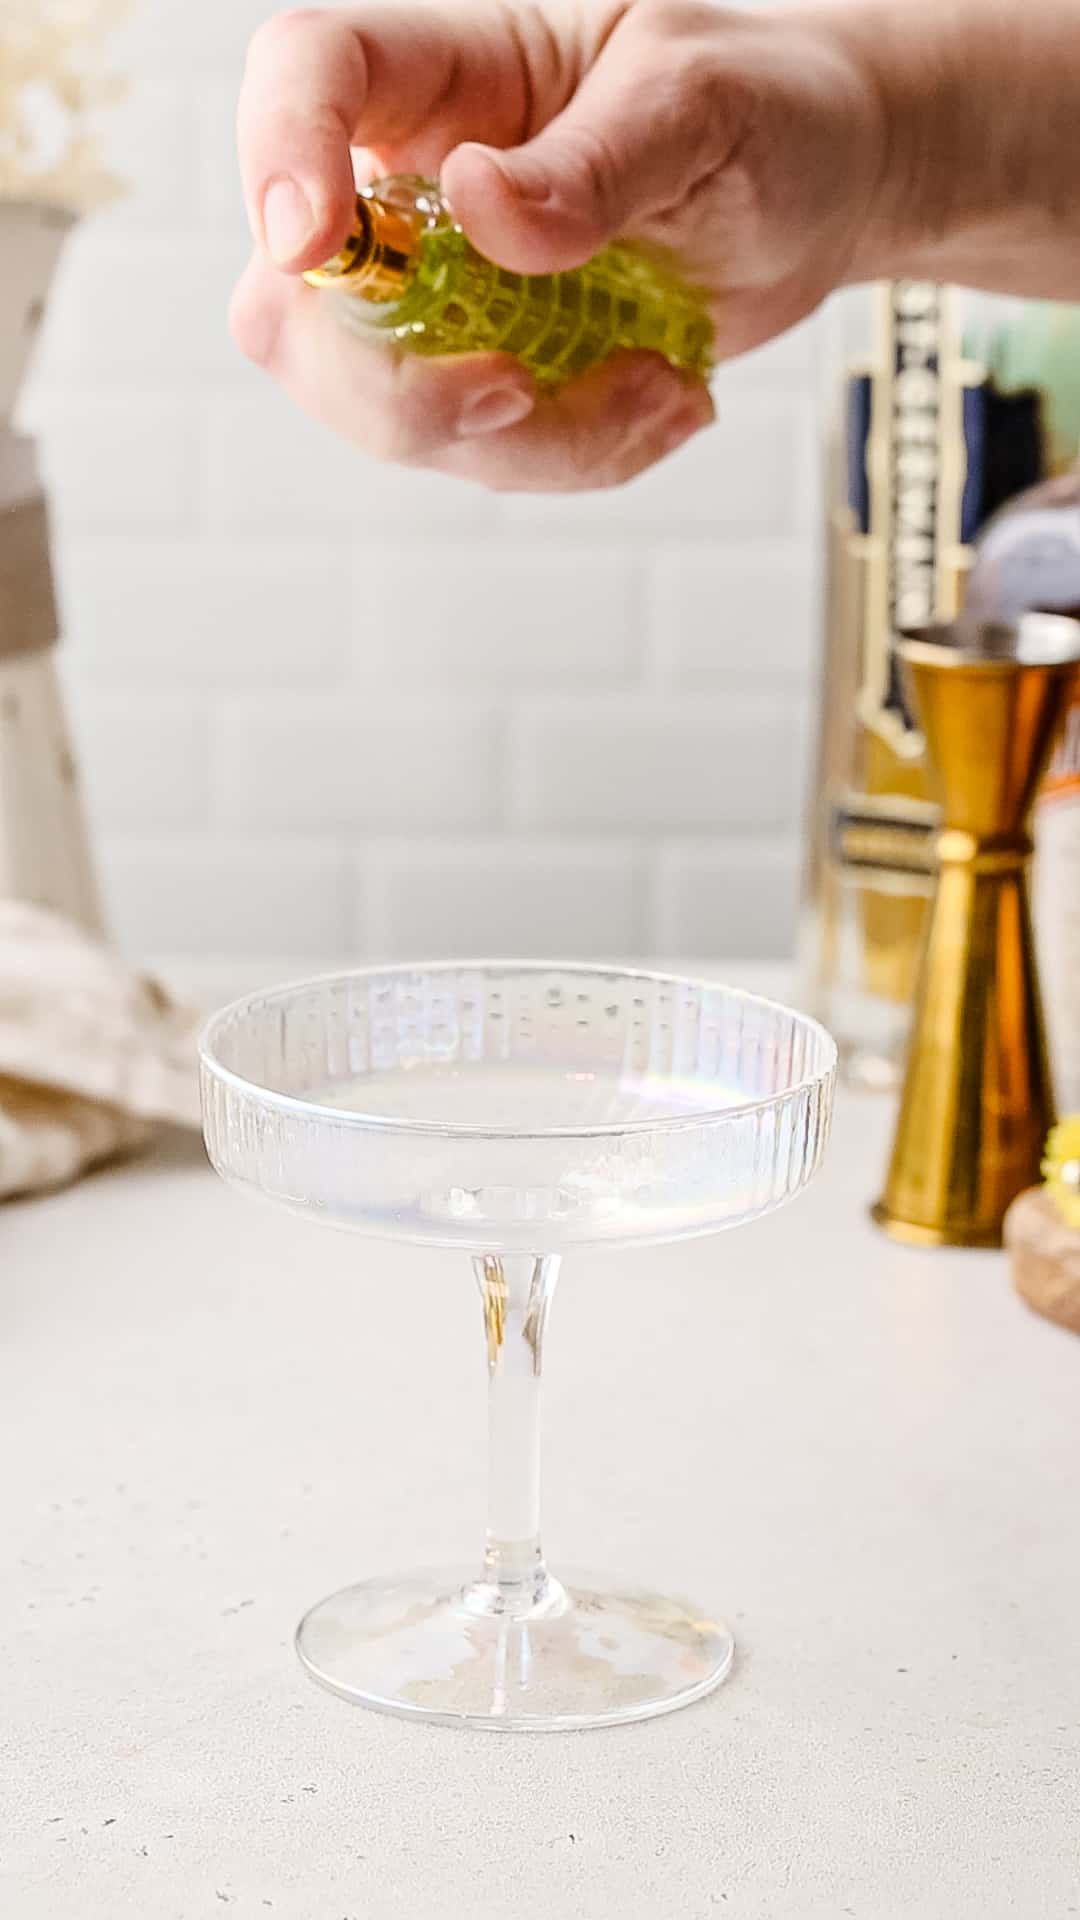 Hand using a spray bottle to add absinthe to the inside of a cocktail glass.